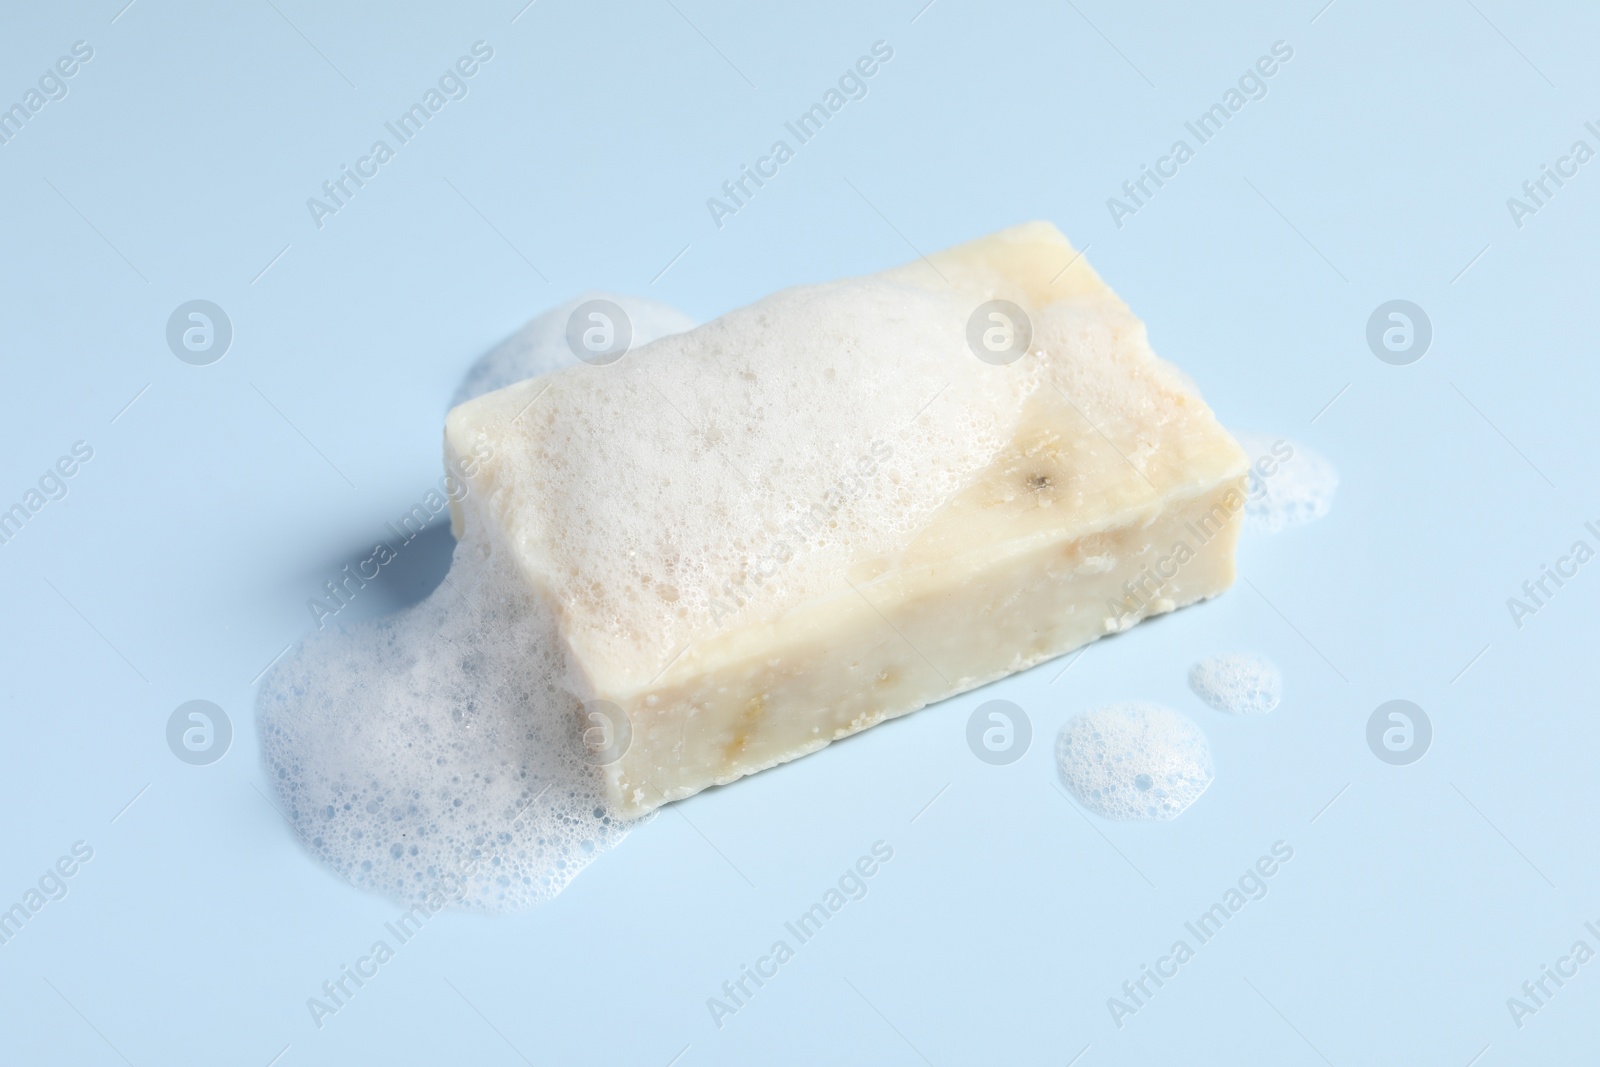 Photo of Soap with fluffy foam on light blue background